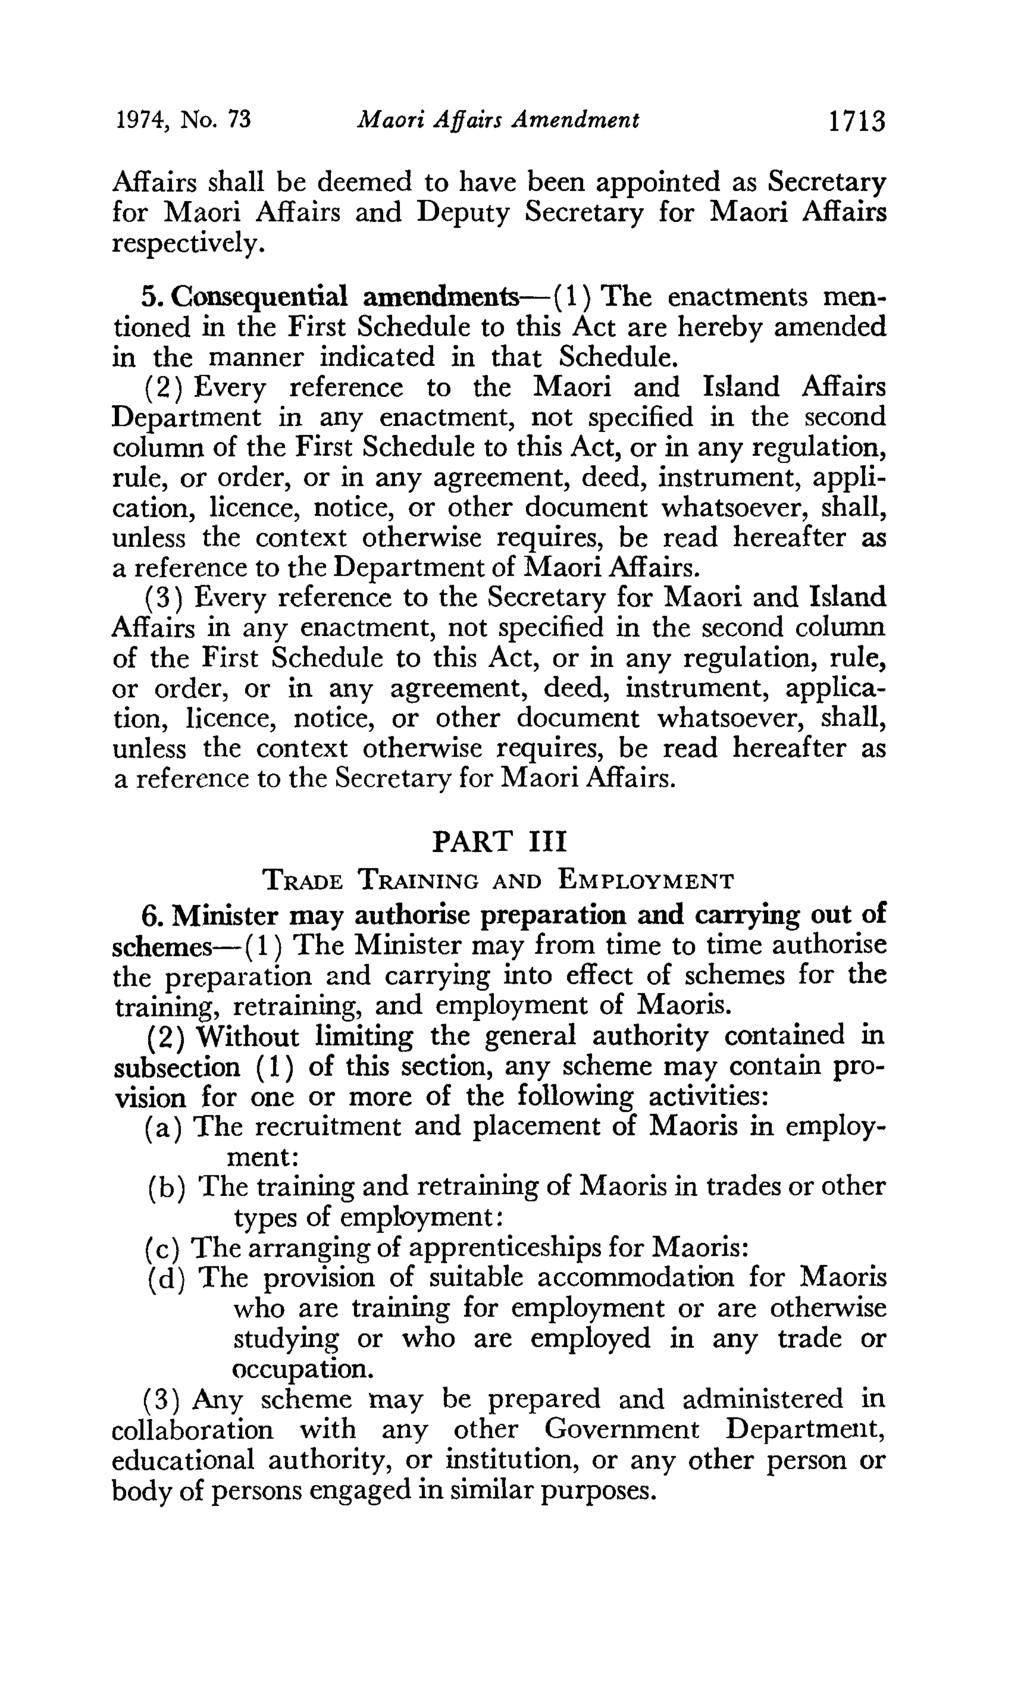 1974, No. 73 Maori Affairs Amendment 1713 Affairs shall be deemed to have been appointed as Secretary for Maori Affairs and Deputy Secretary for Maori Affairs respectively. 5.